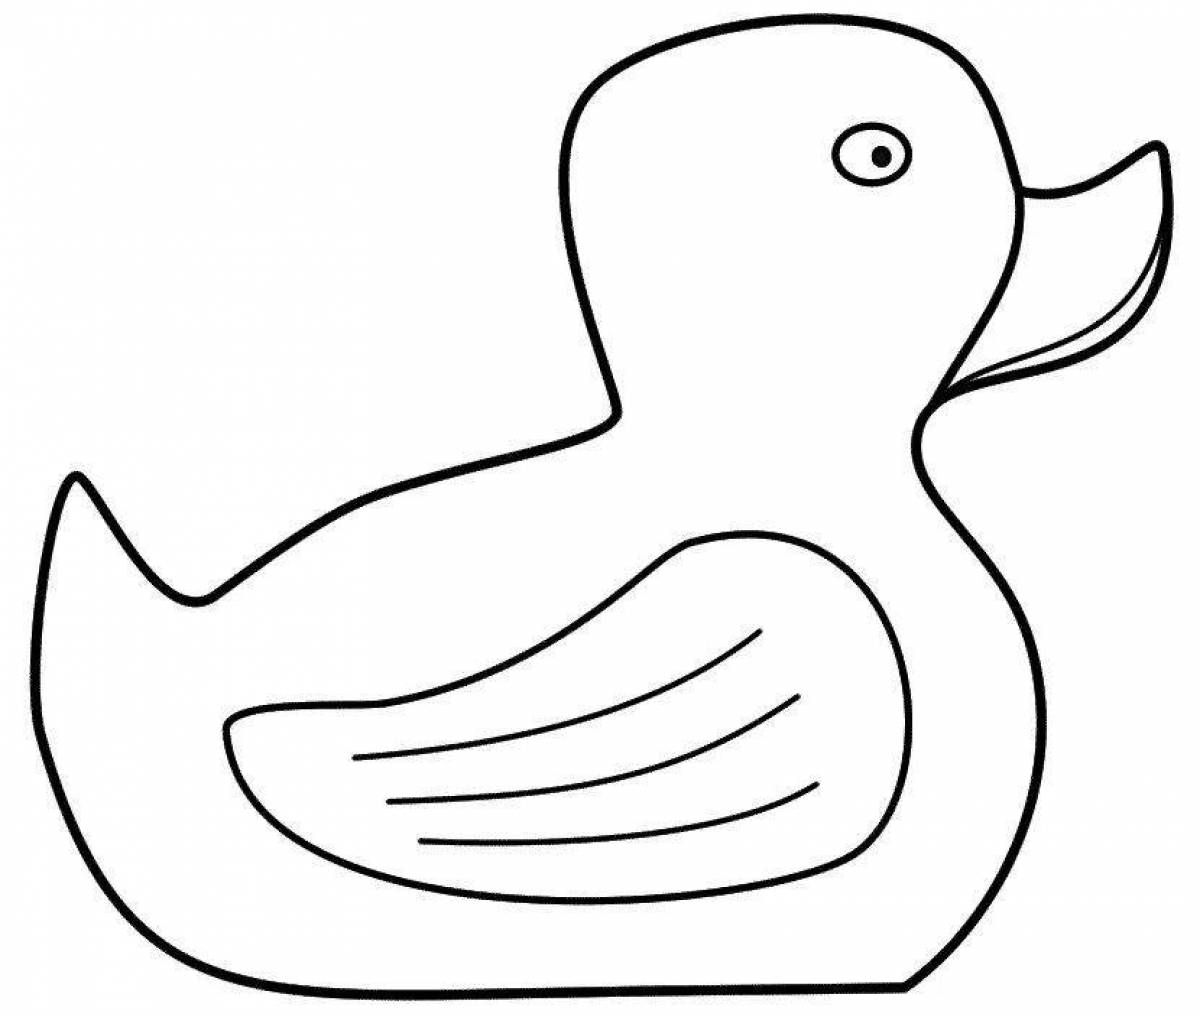 Charming Dymkovo duck, second oldest coloring page